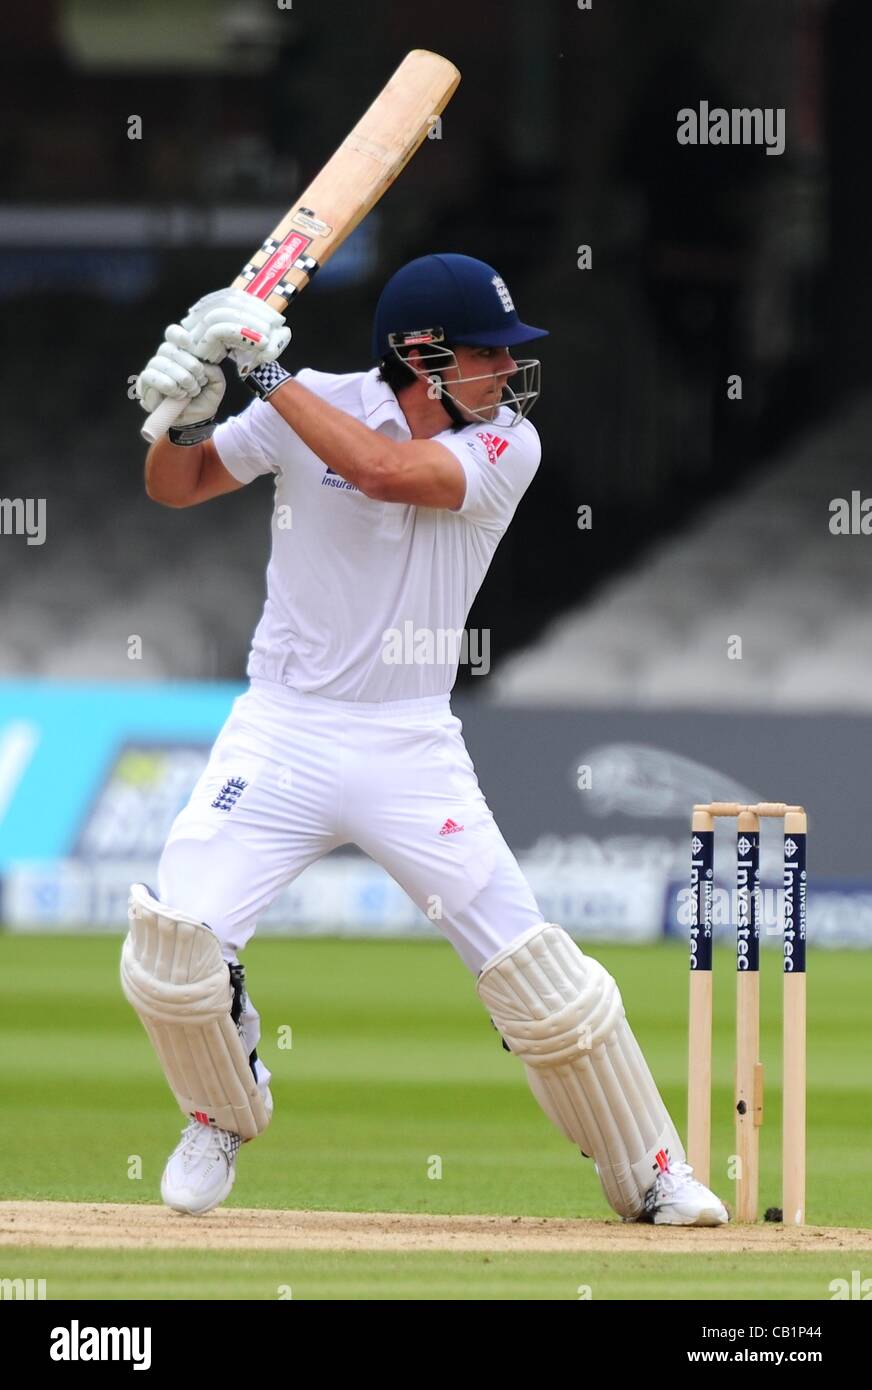 21.05.2012 London, England.  Alastair Cook in action during the First Test between England and West Indies from Lords. Stock Photo